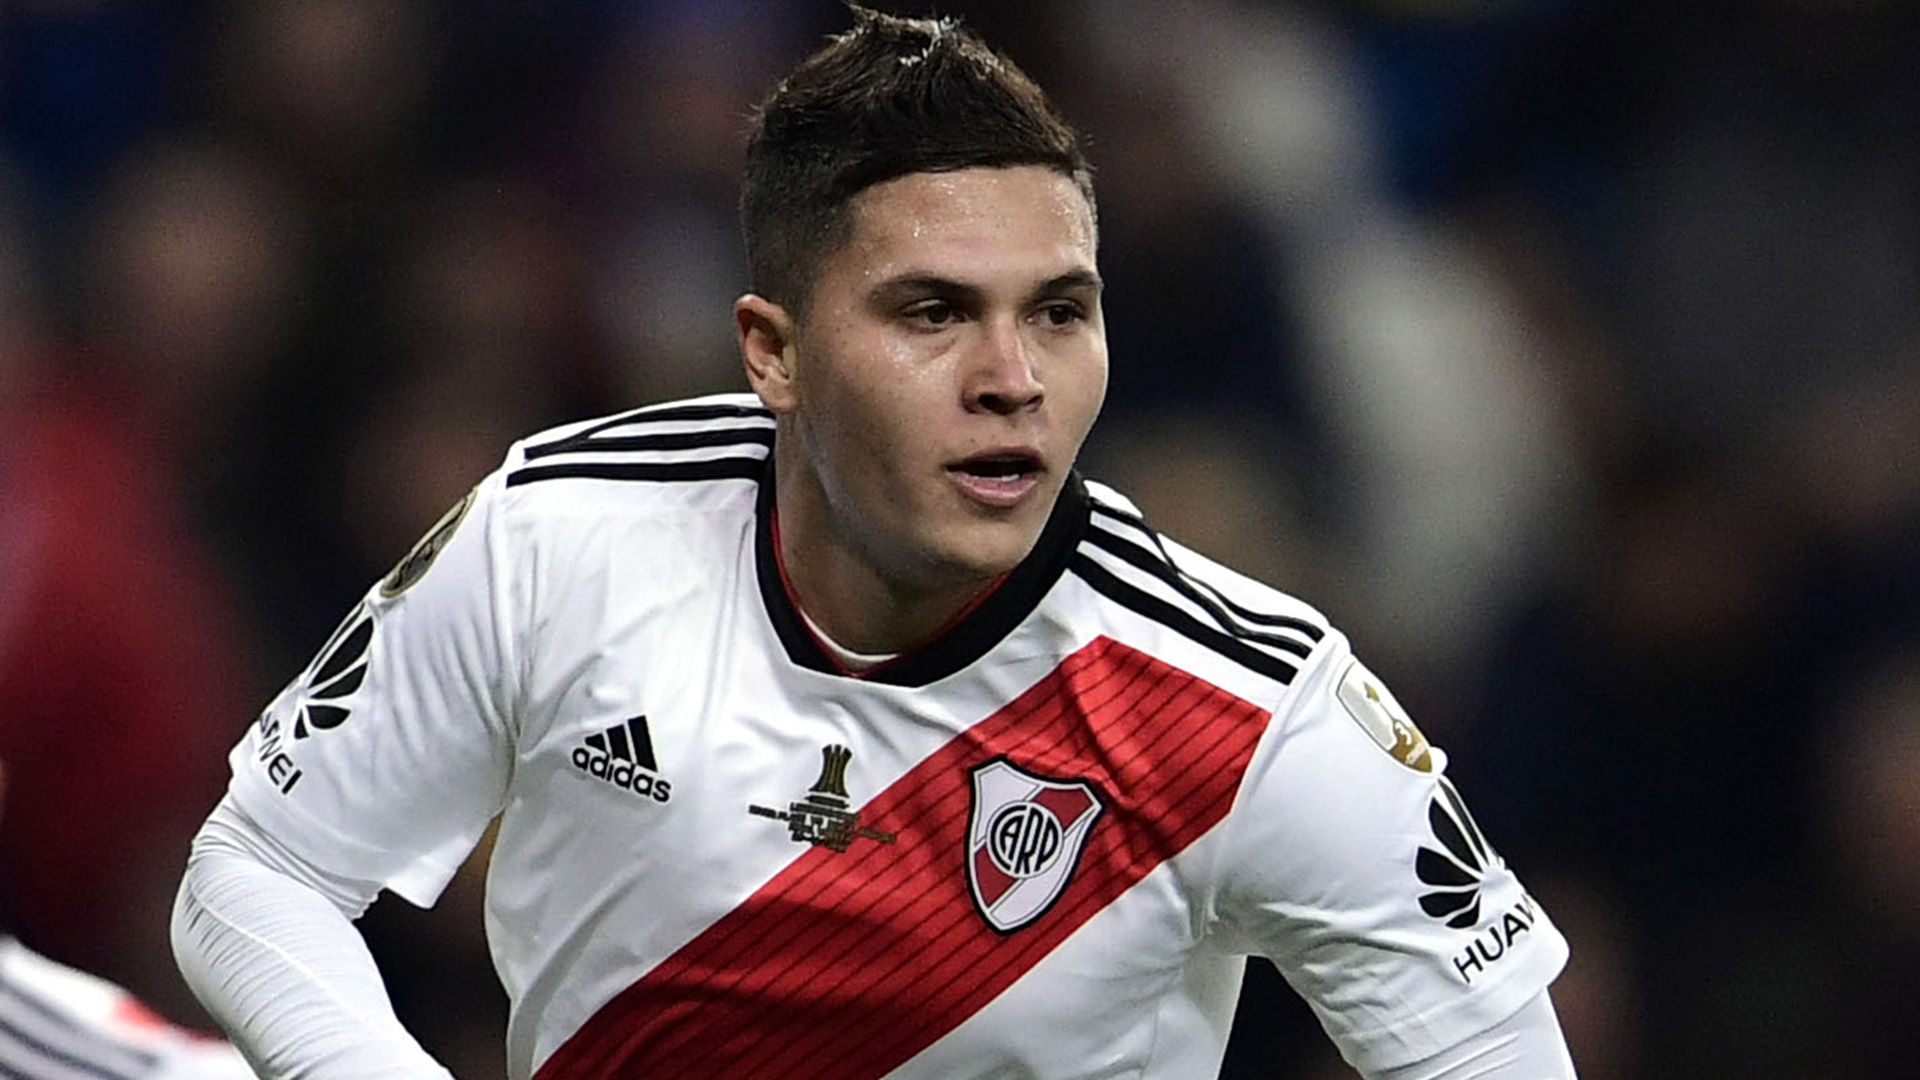 zzzzinte1River Plate's Colombian Juan Fernando Quintero celebrates after scoring against Boca Juniors during the second leg match of the all-Argentine Copa Libertadores final, at the Santiago Bernabeu stadium in Madrid, on December 9, 2018. (Photo by Javier SORIANO / AFP)zzzz